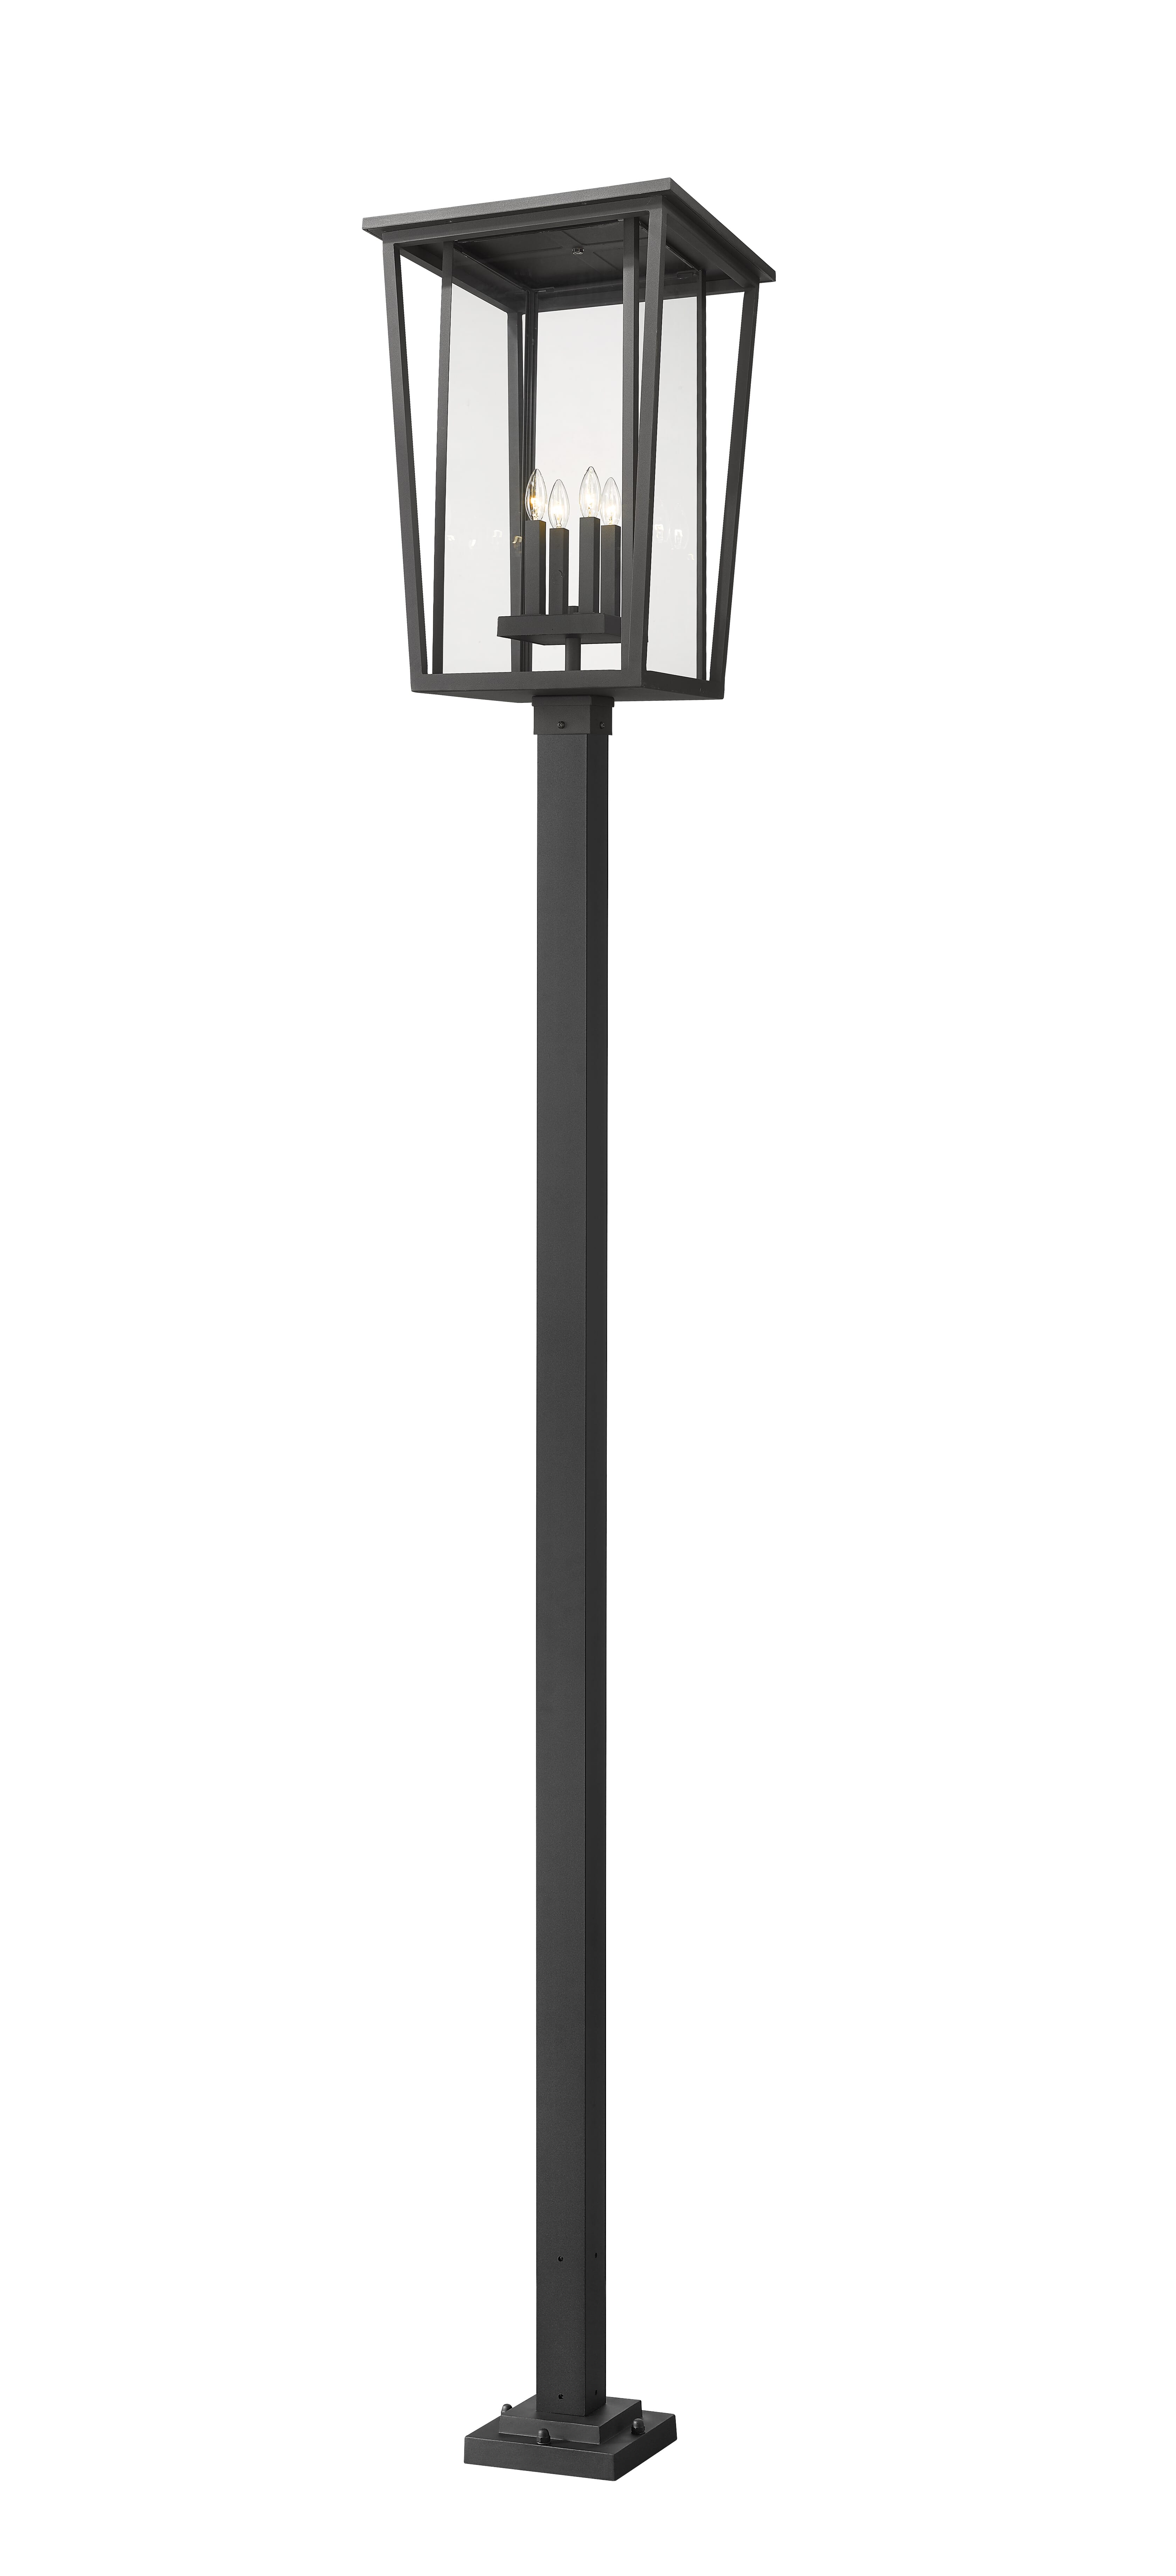 Seoul 4-Light Outdoor Post Mounted Fixture Light In Black